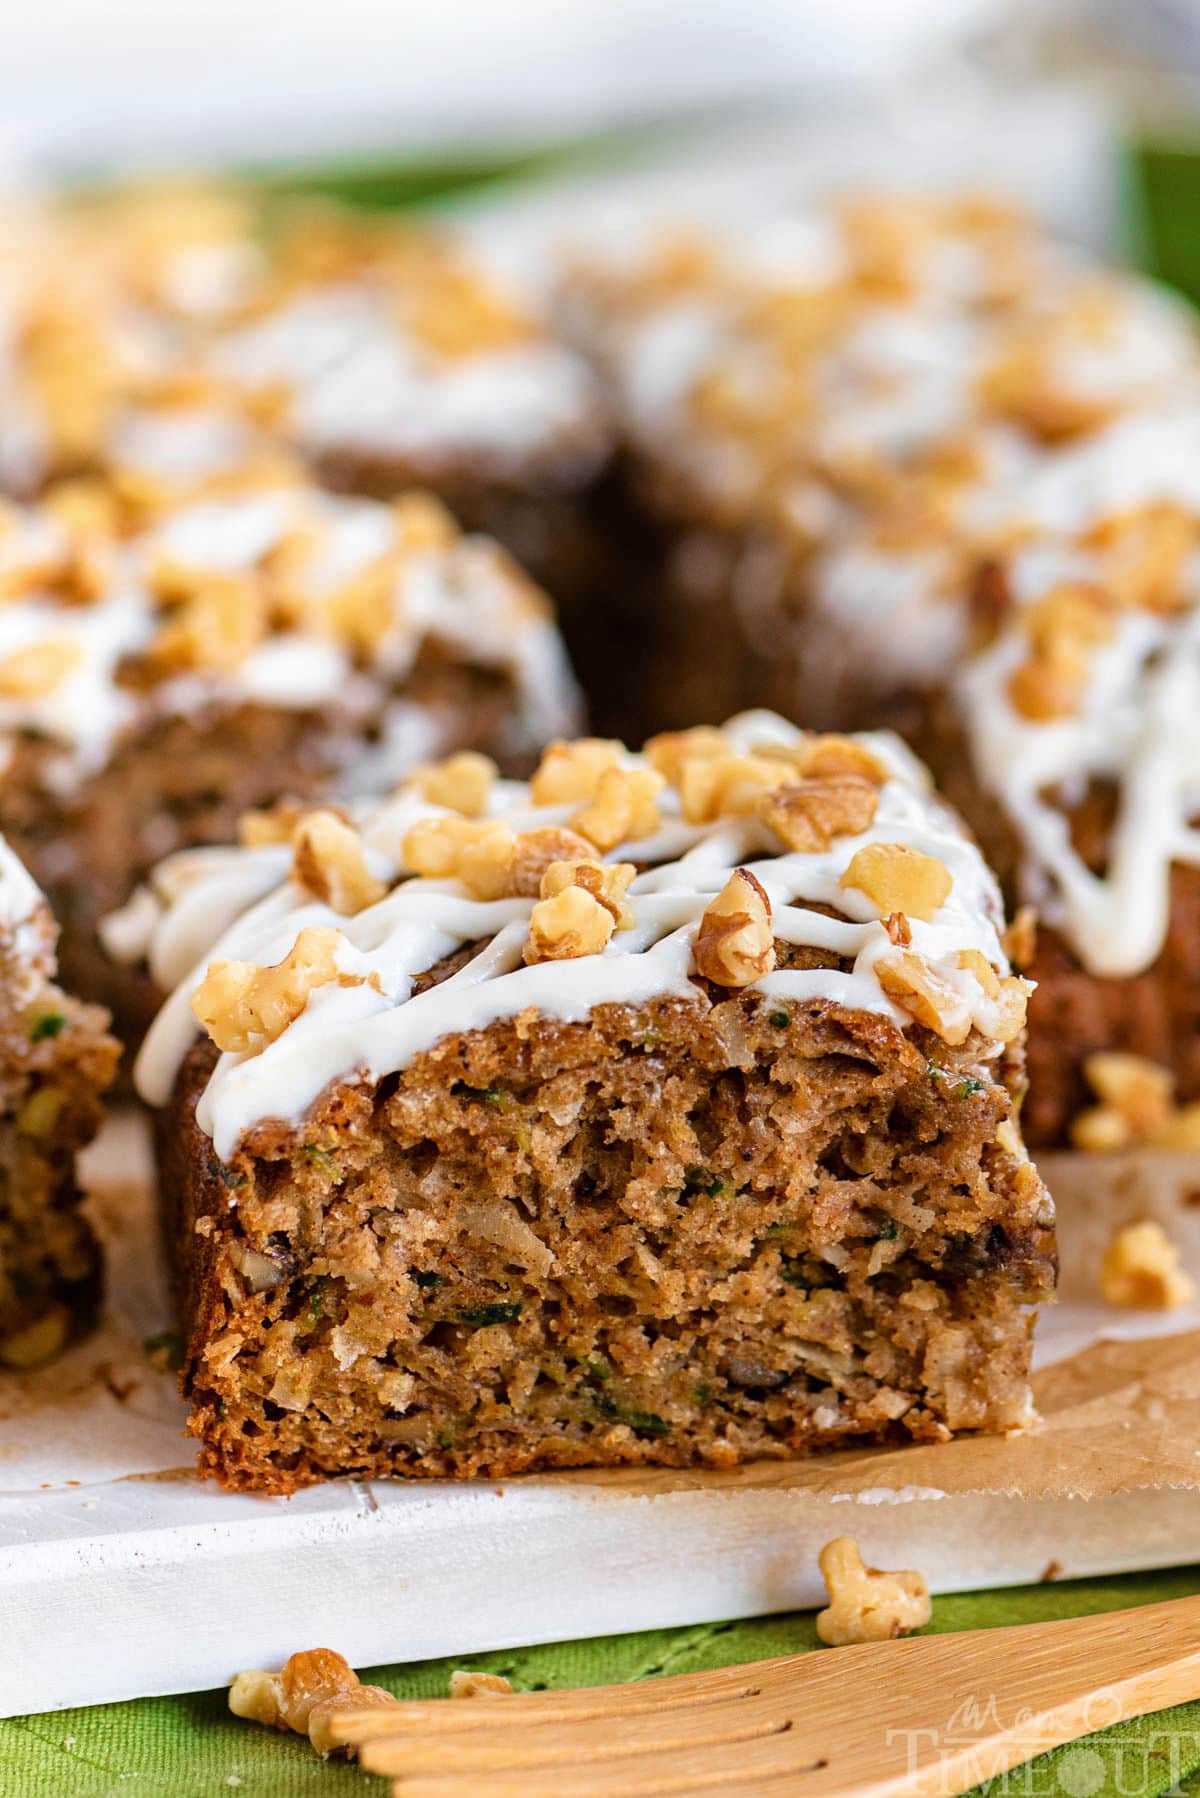 front view of a piece of zucchini snack cake on a board. Cake is frosting with cream cheese icing and topped with walnuts.